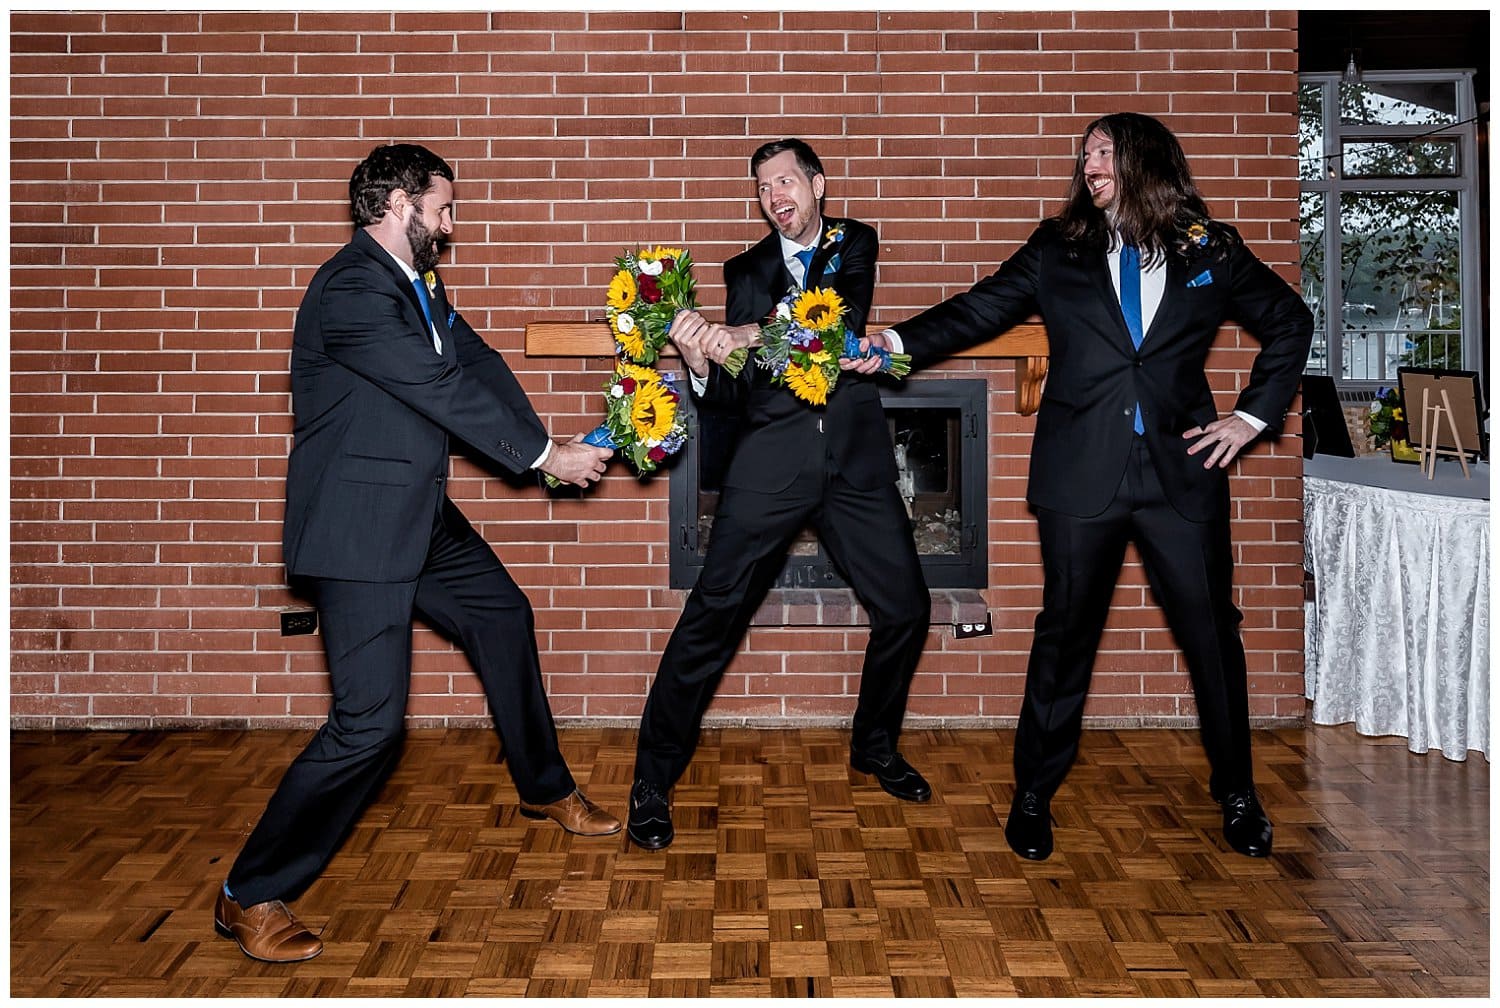 The groom and his groomsmen fight with sunflower bouquets during wedding photos at Saraguay House.